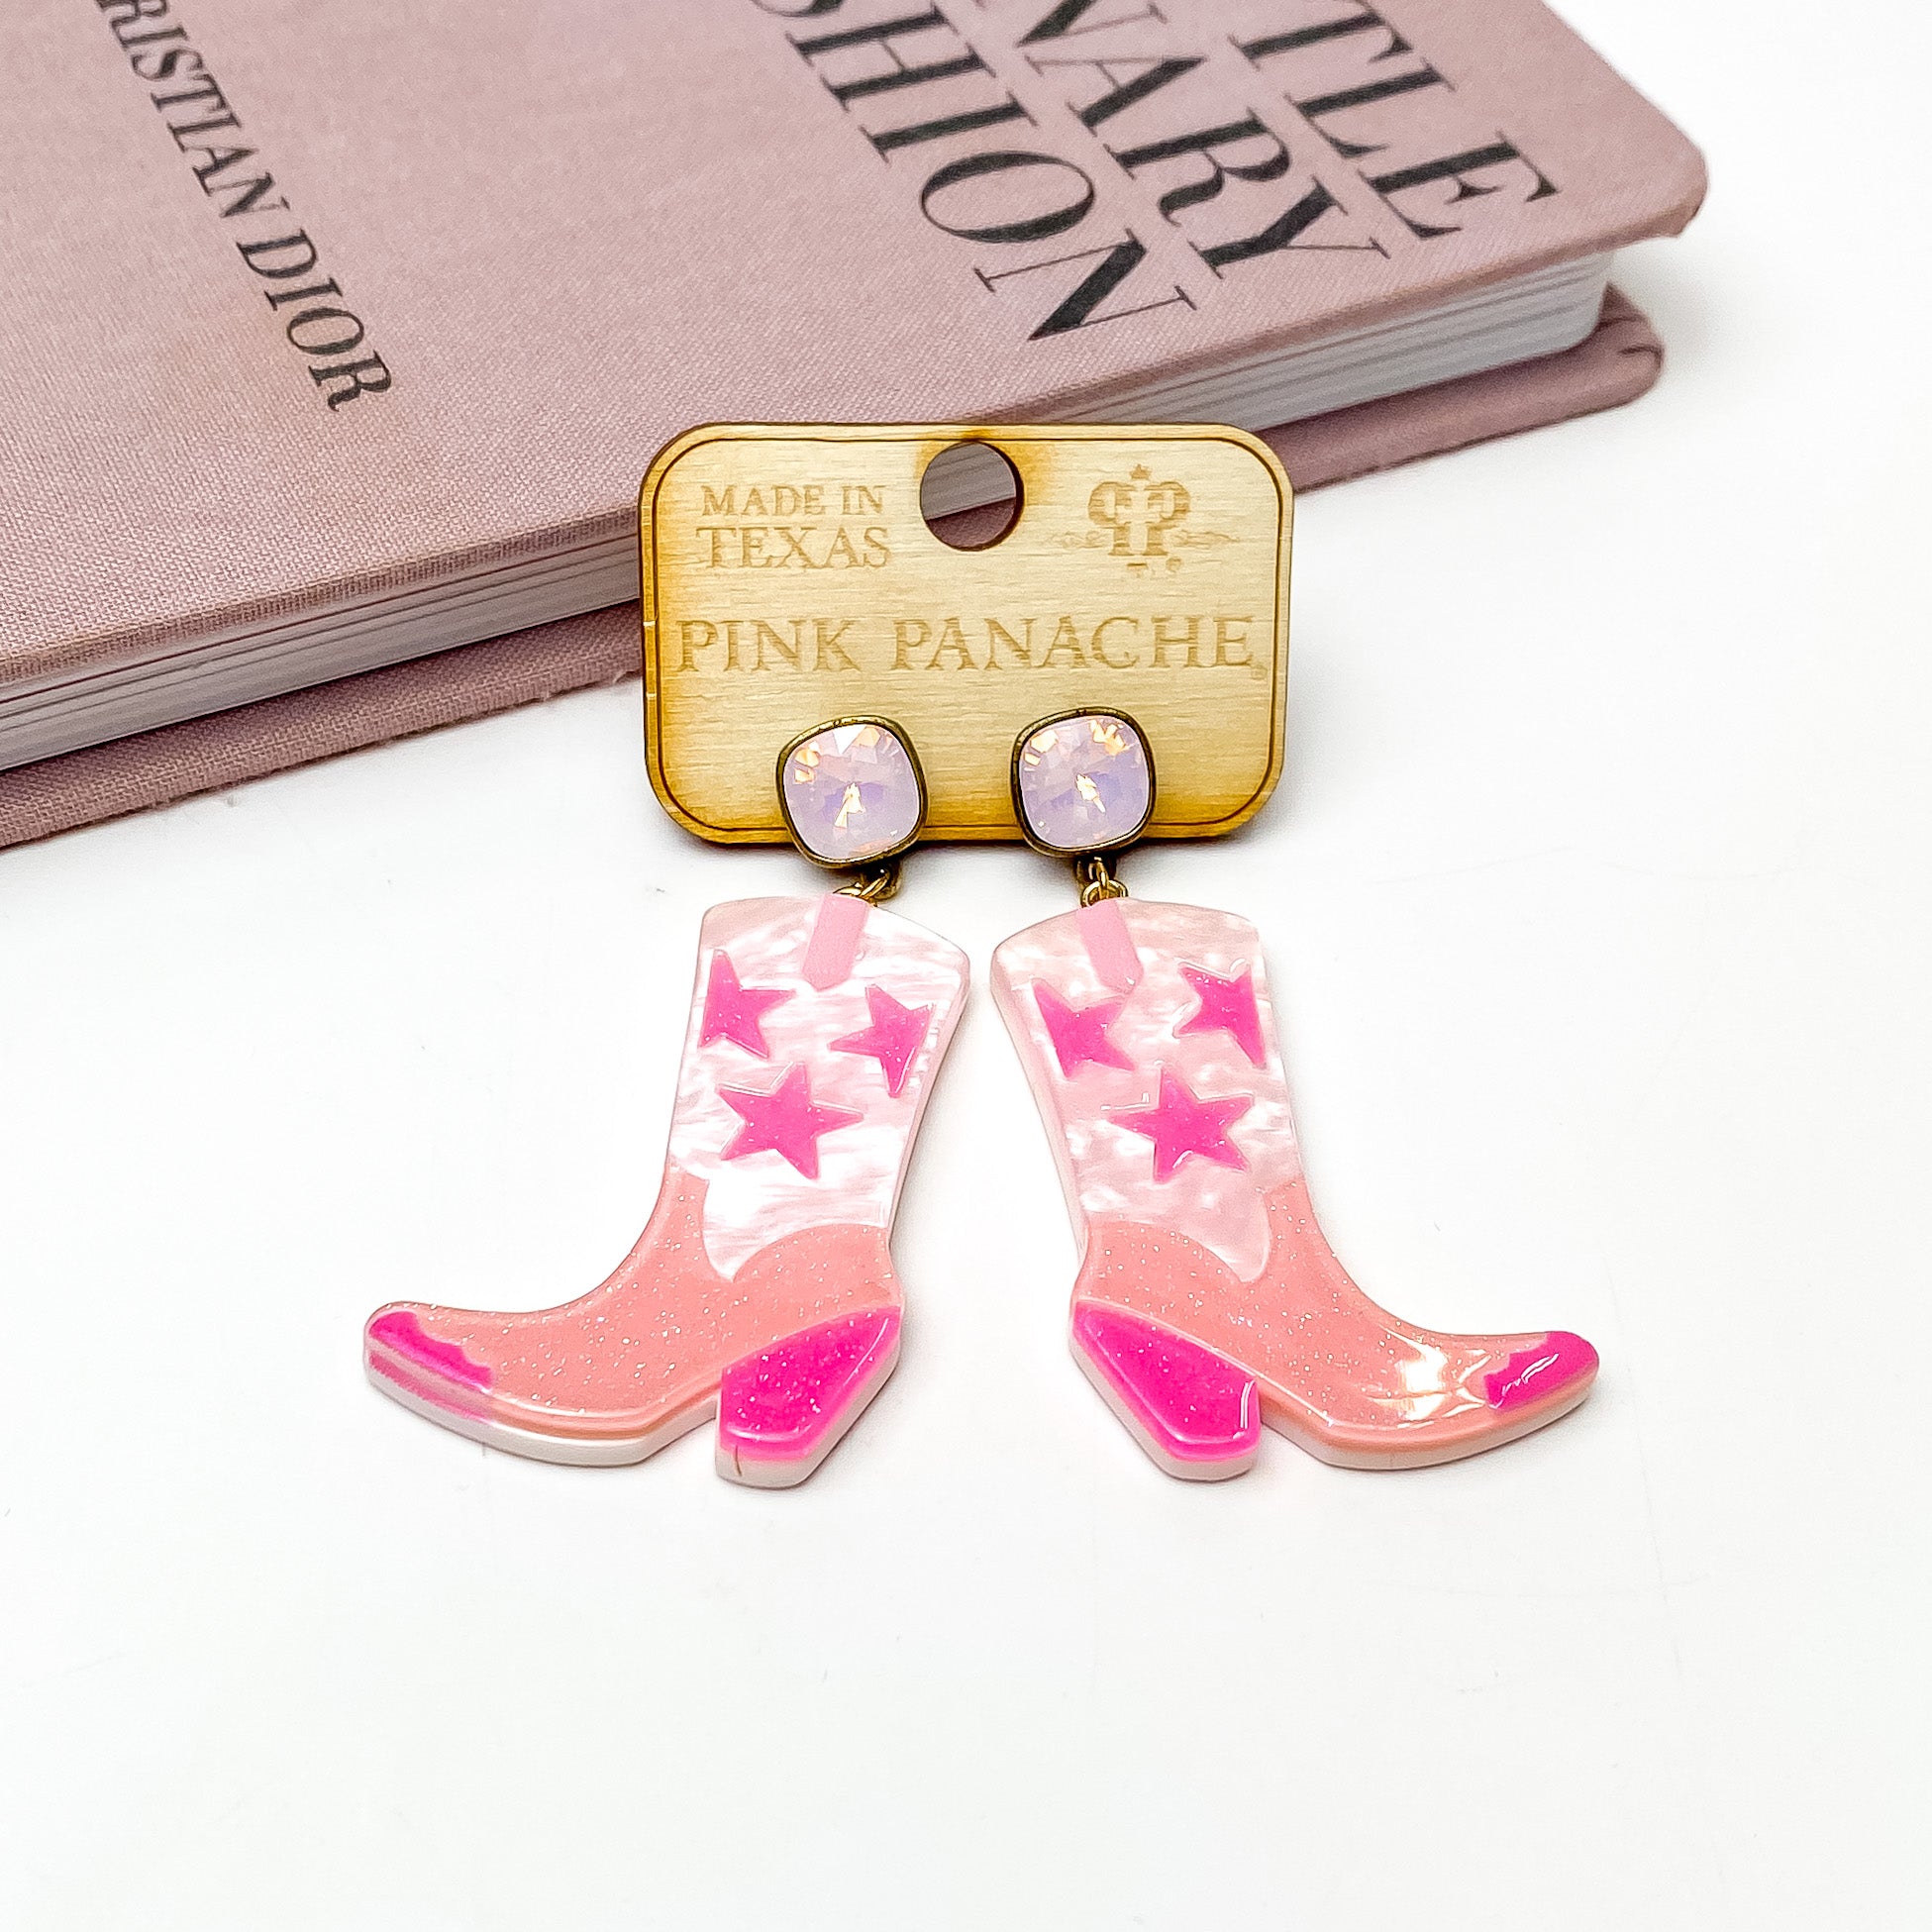 Rose water opal cushion cut crystal post earrings with a pink pearlized and glitter boot pendants. These boot pendants have pink accents. These earrings are pictured on a wooden earring holder on a white background in front of a mauve colored book. 